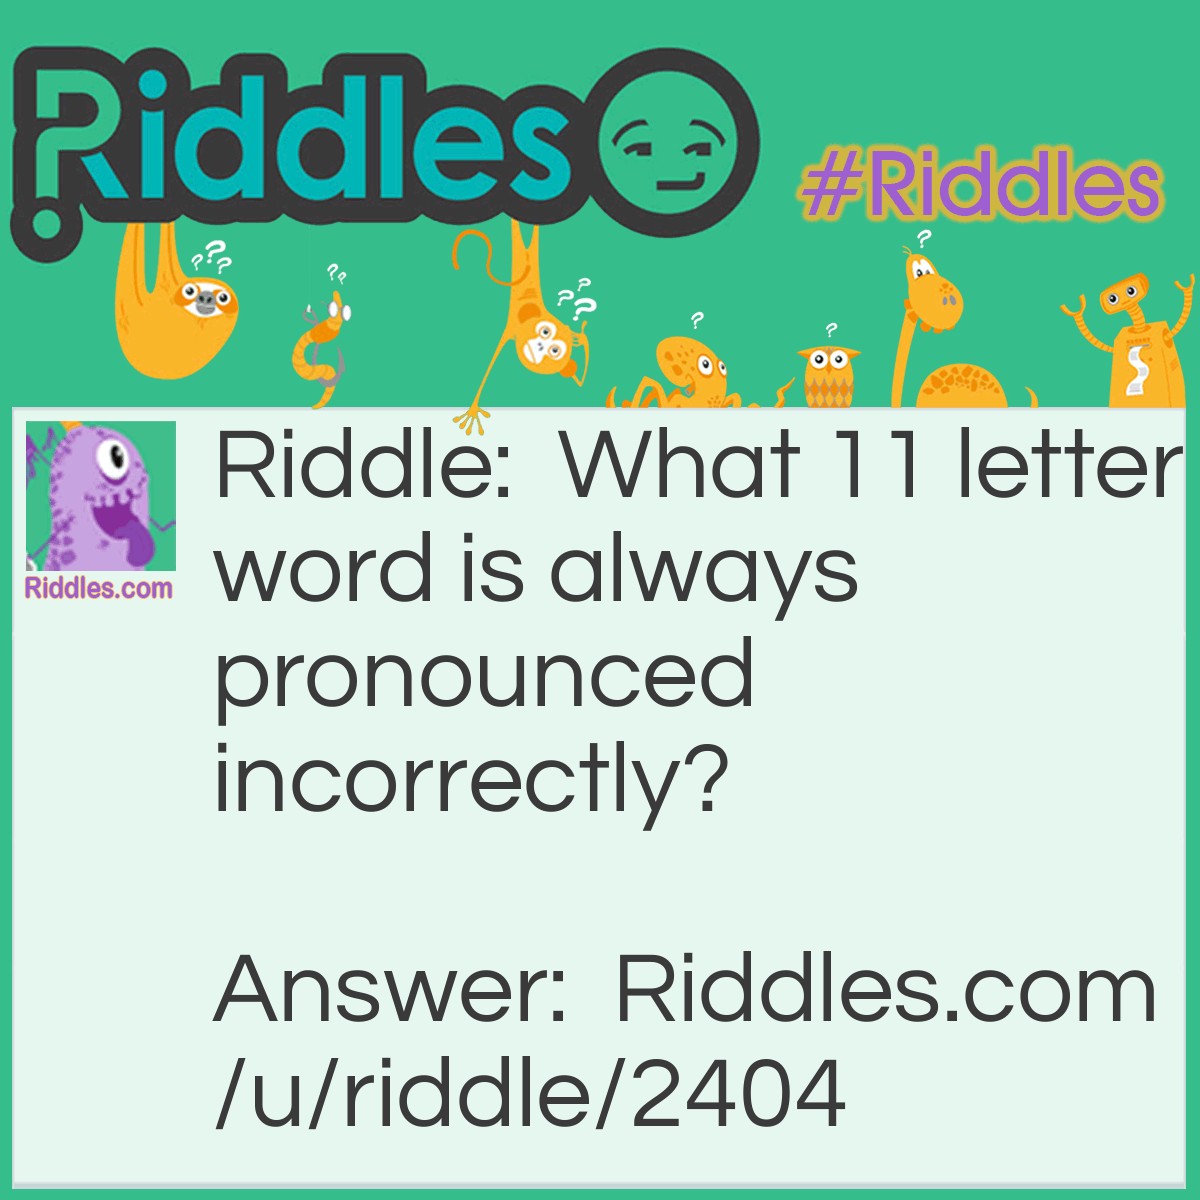 Riddle: What 11 letter word is always pronounced incorrectly? Answer: Incorrectly.